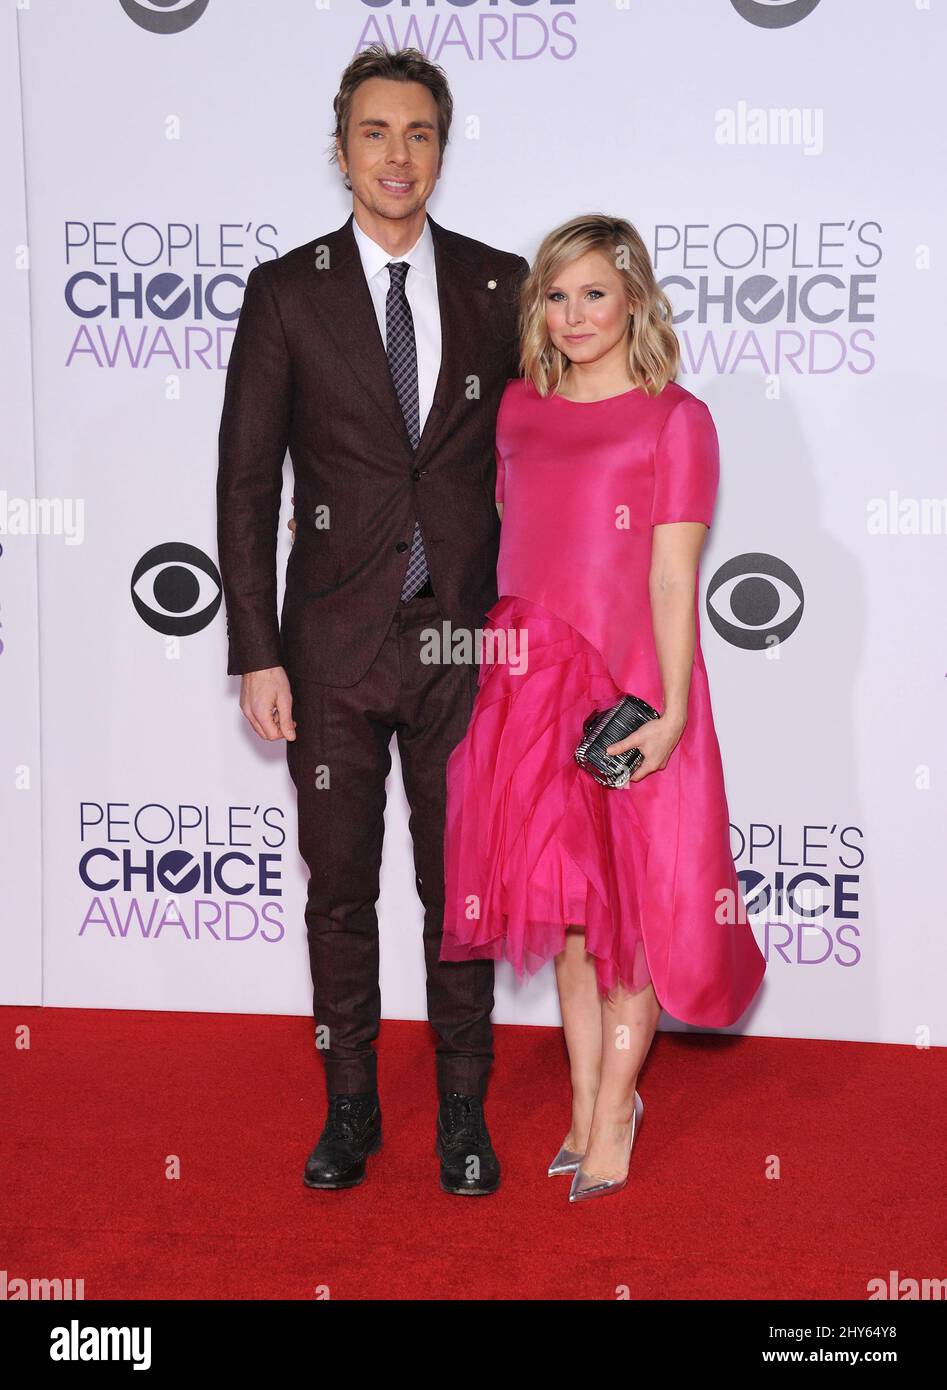 Dax Shepard & Kristen Bell arriving at the People's Choice Awards at the Nokia Theatre on Wednesday, Jan. 7, 2015, in Los Angeles. Stock Photo